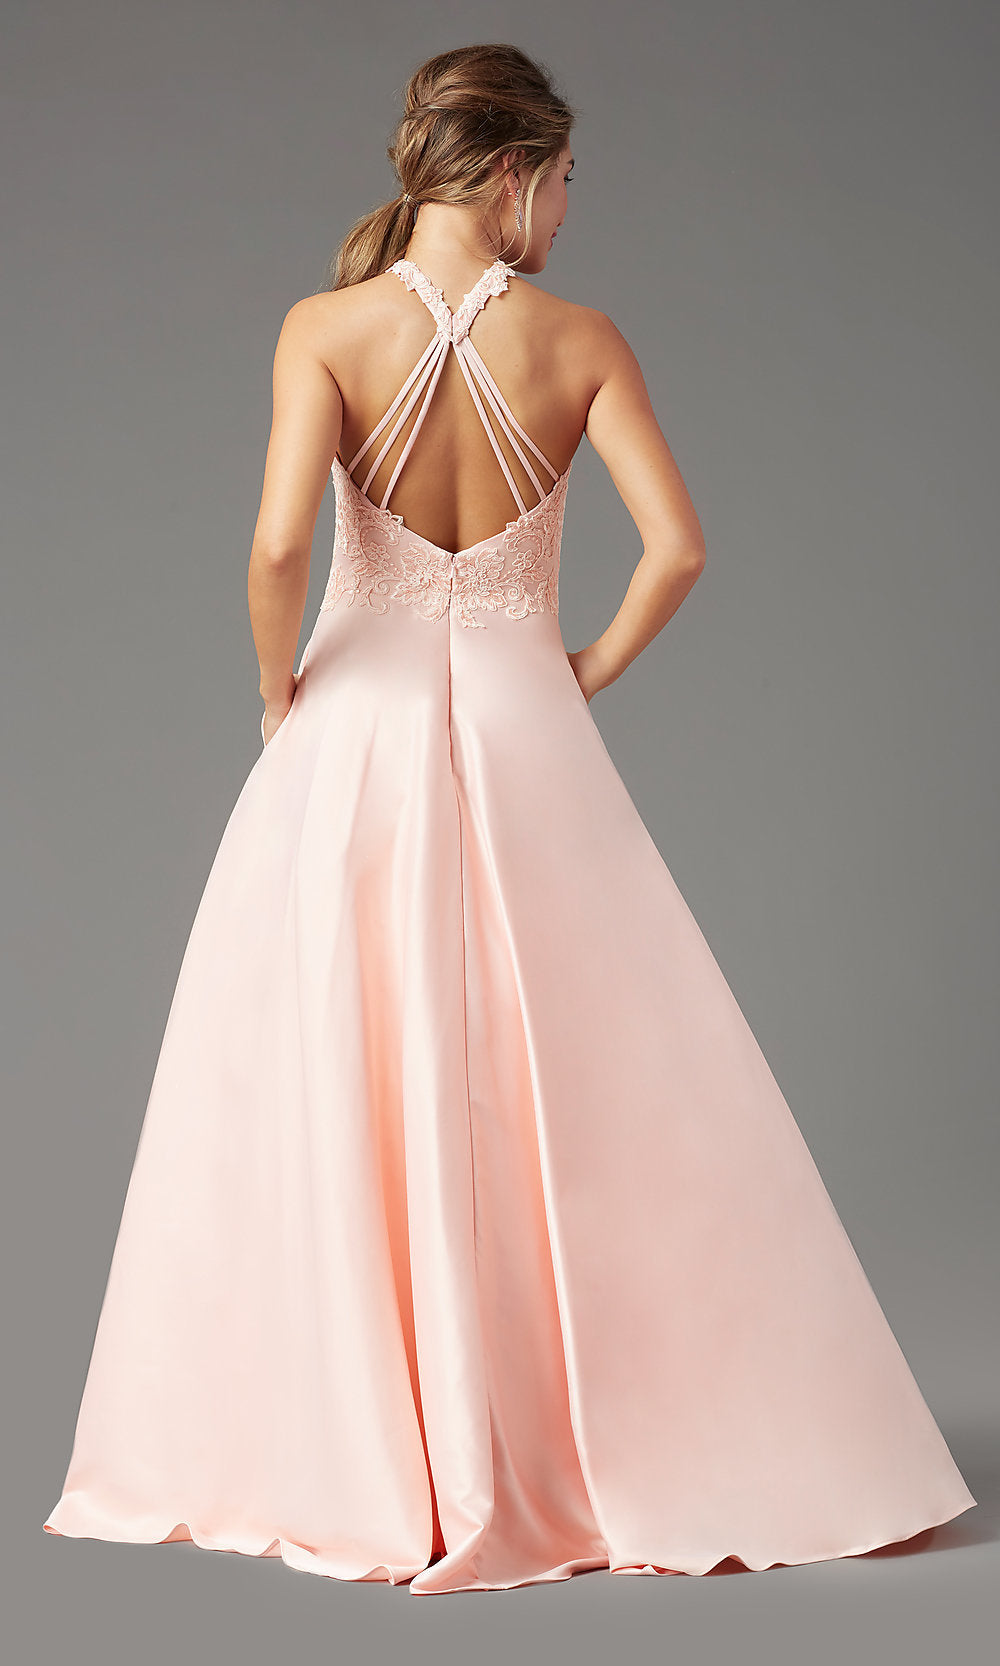  Illusion-Sweetheart Long Prom Dress by PromGirl